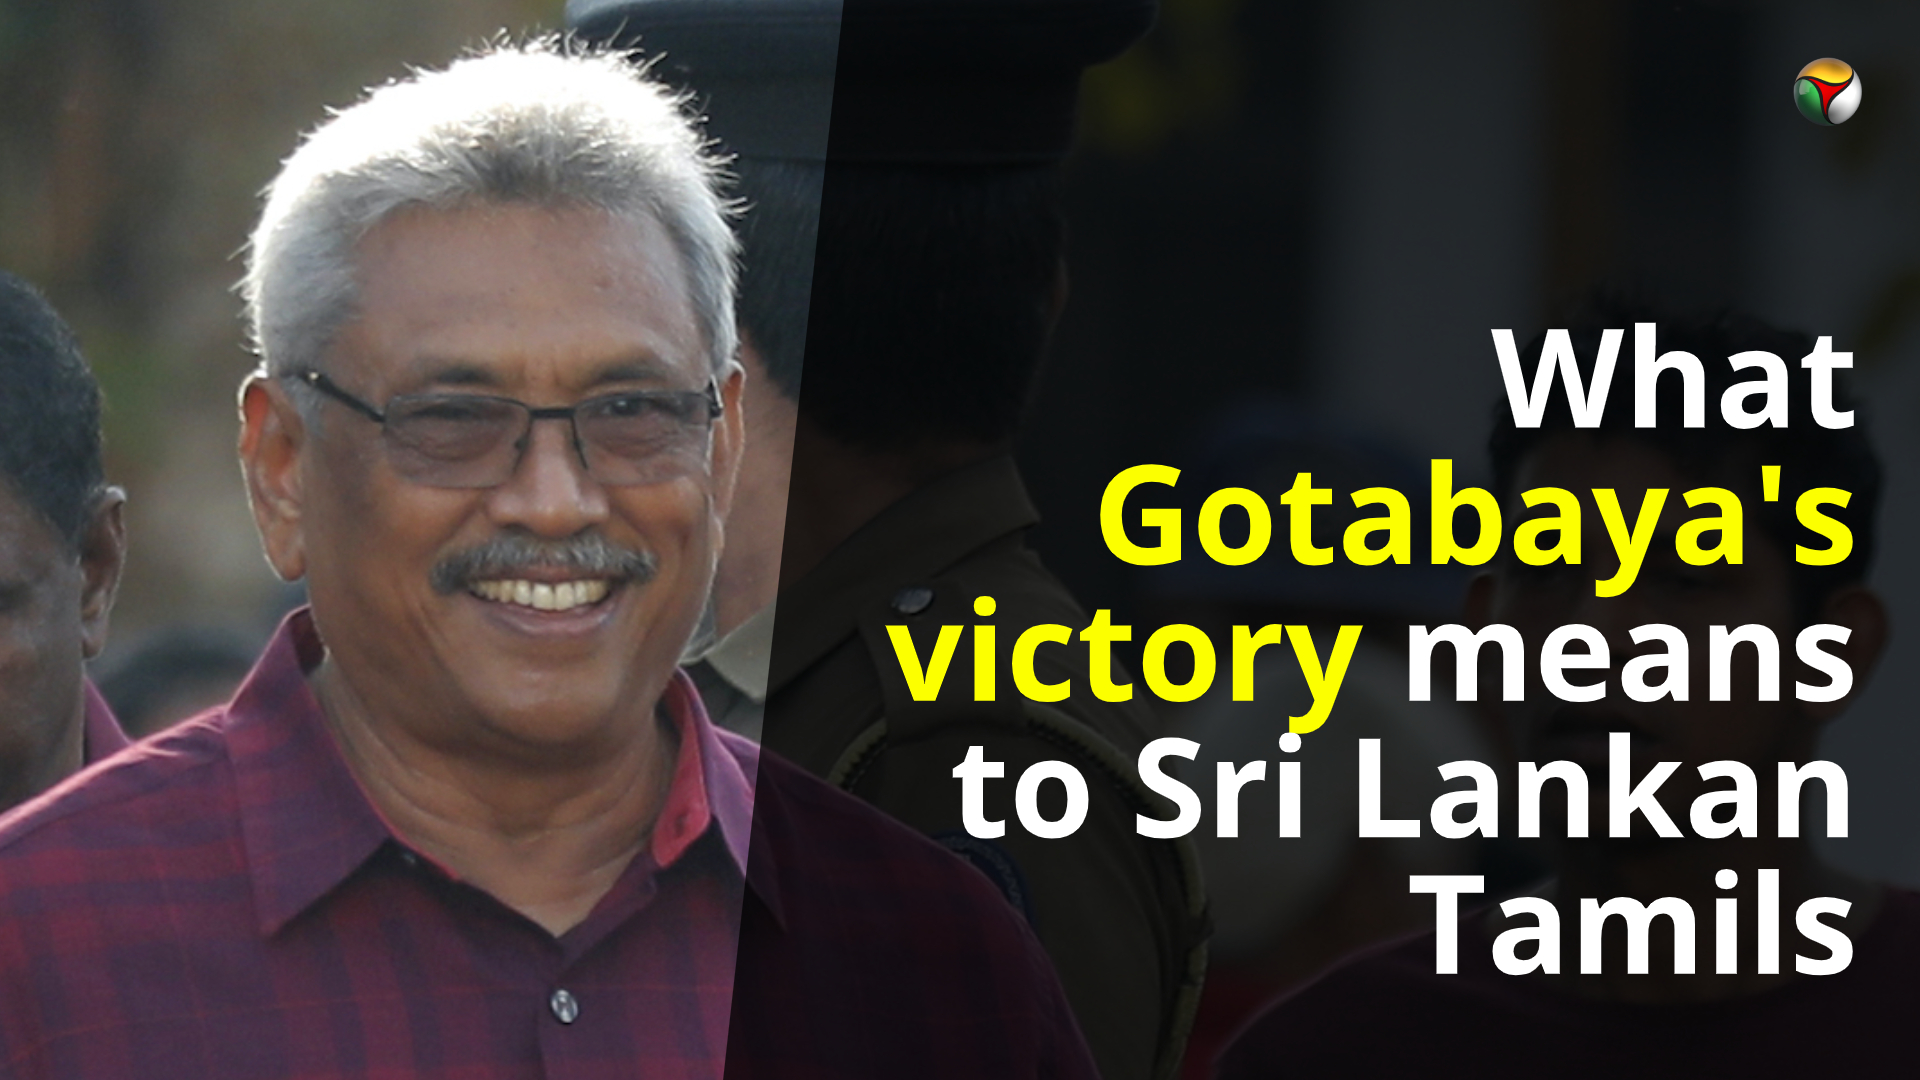 What Gotabayas victory means to Sri Lankan Tamils